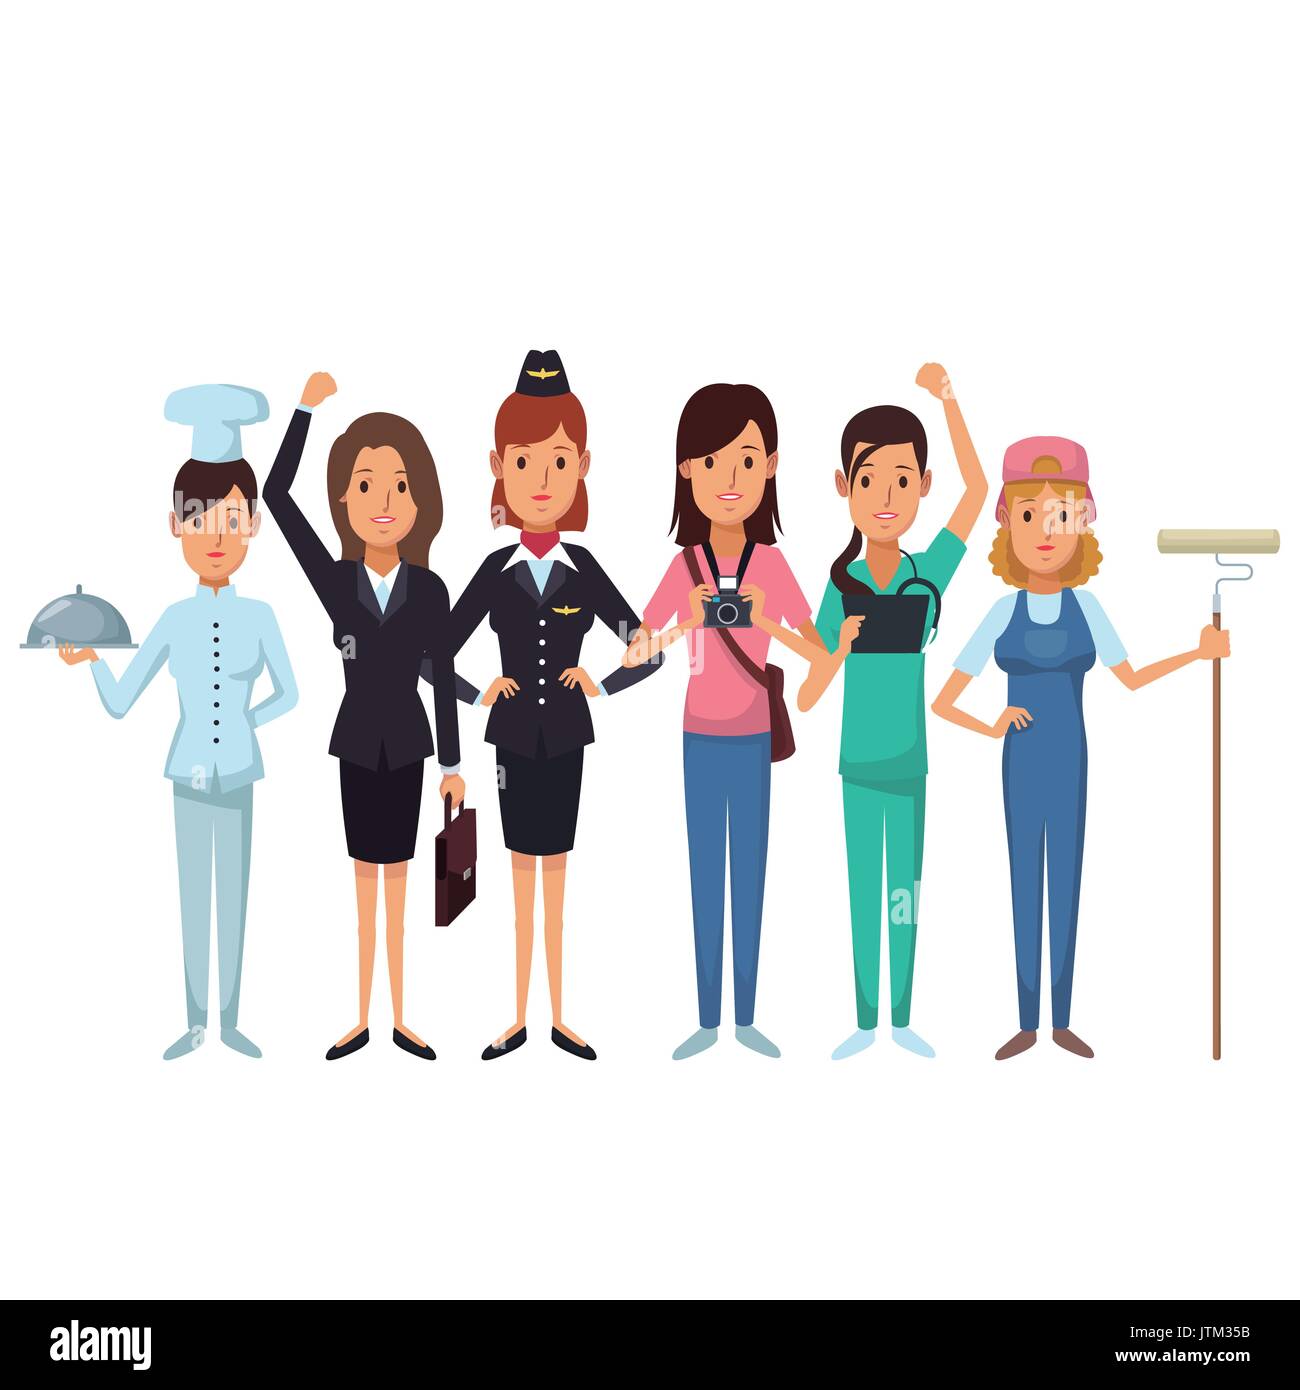 group of professionals clipart